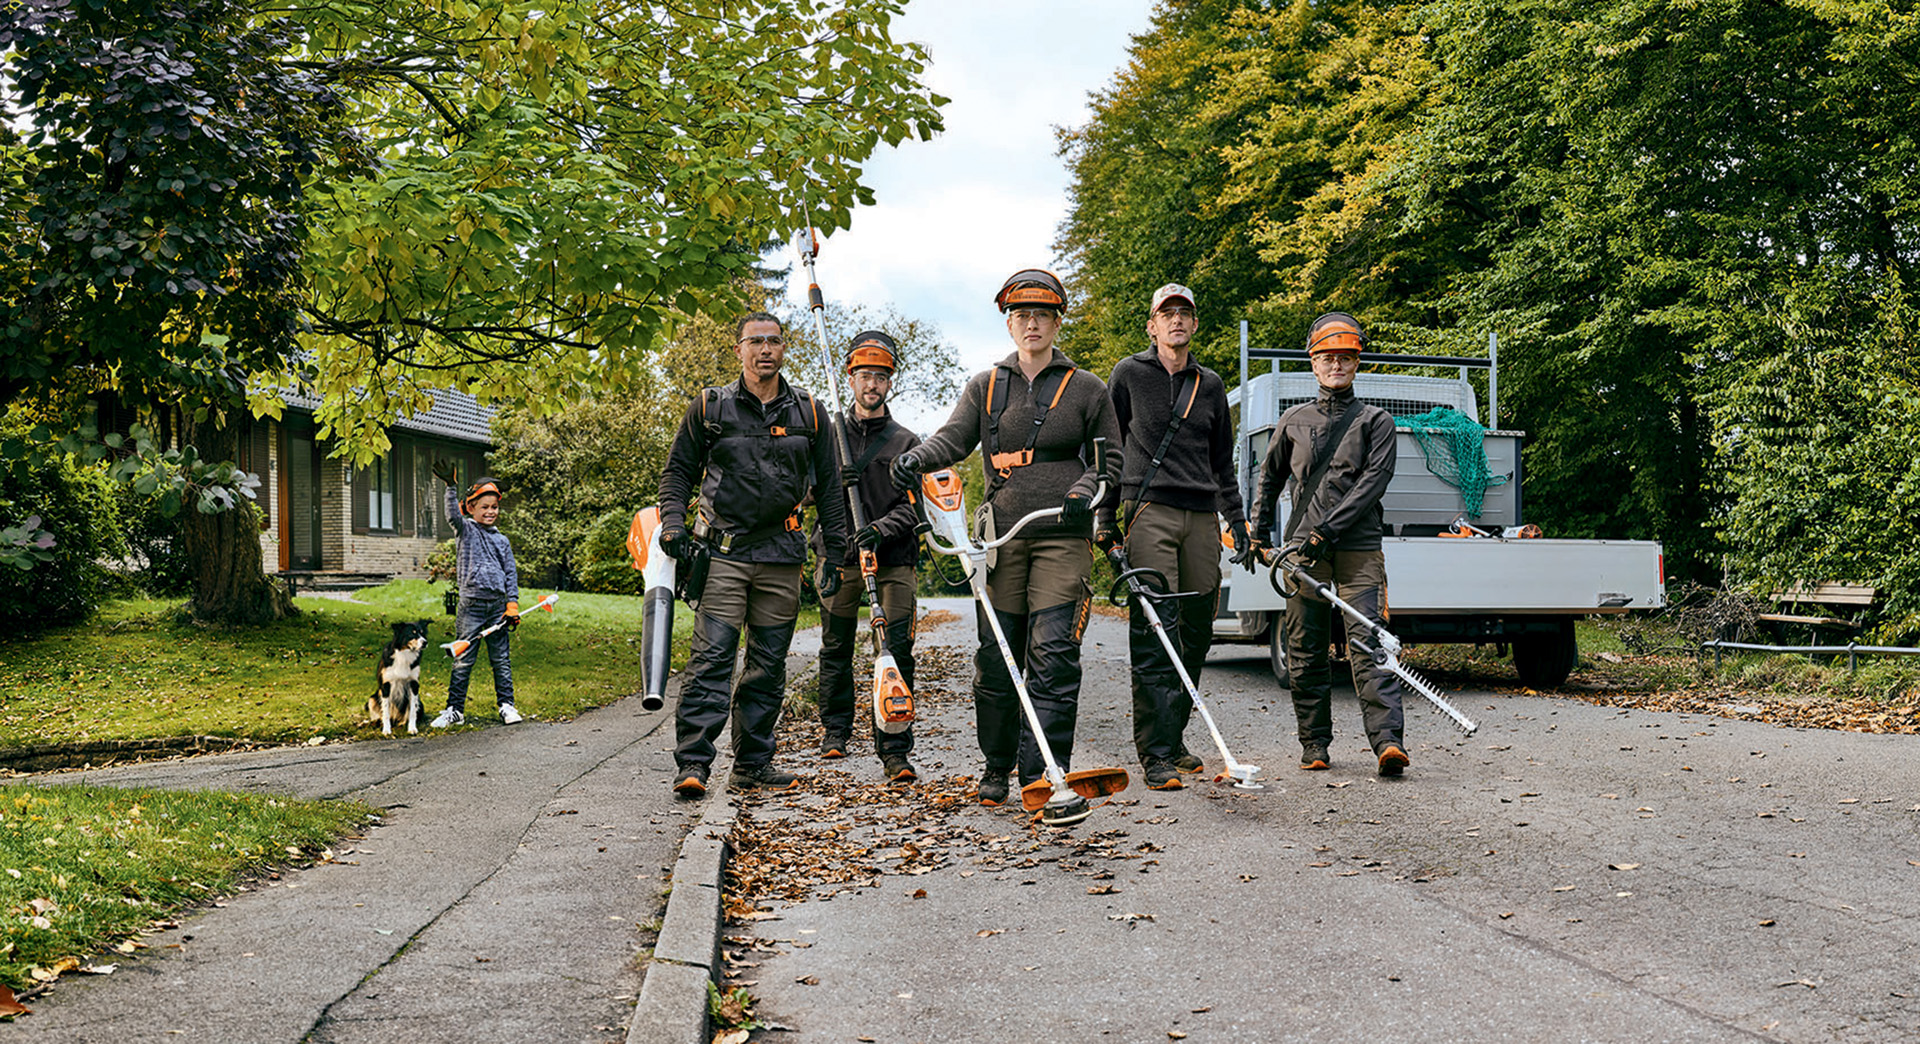 A gardening and landscaping team with STIHL professional battery power tools walking along a street.